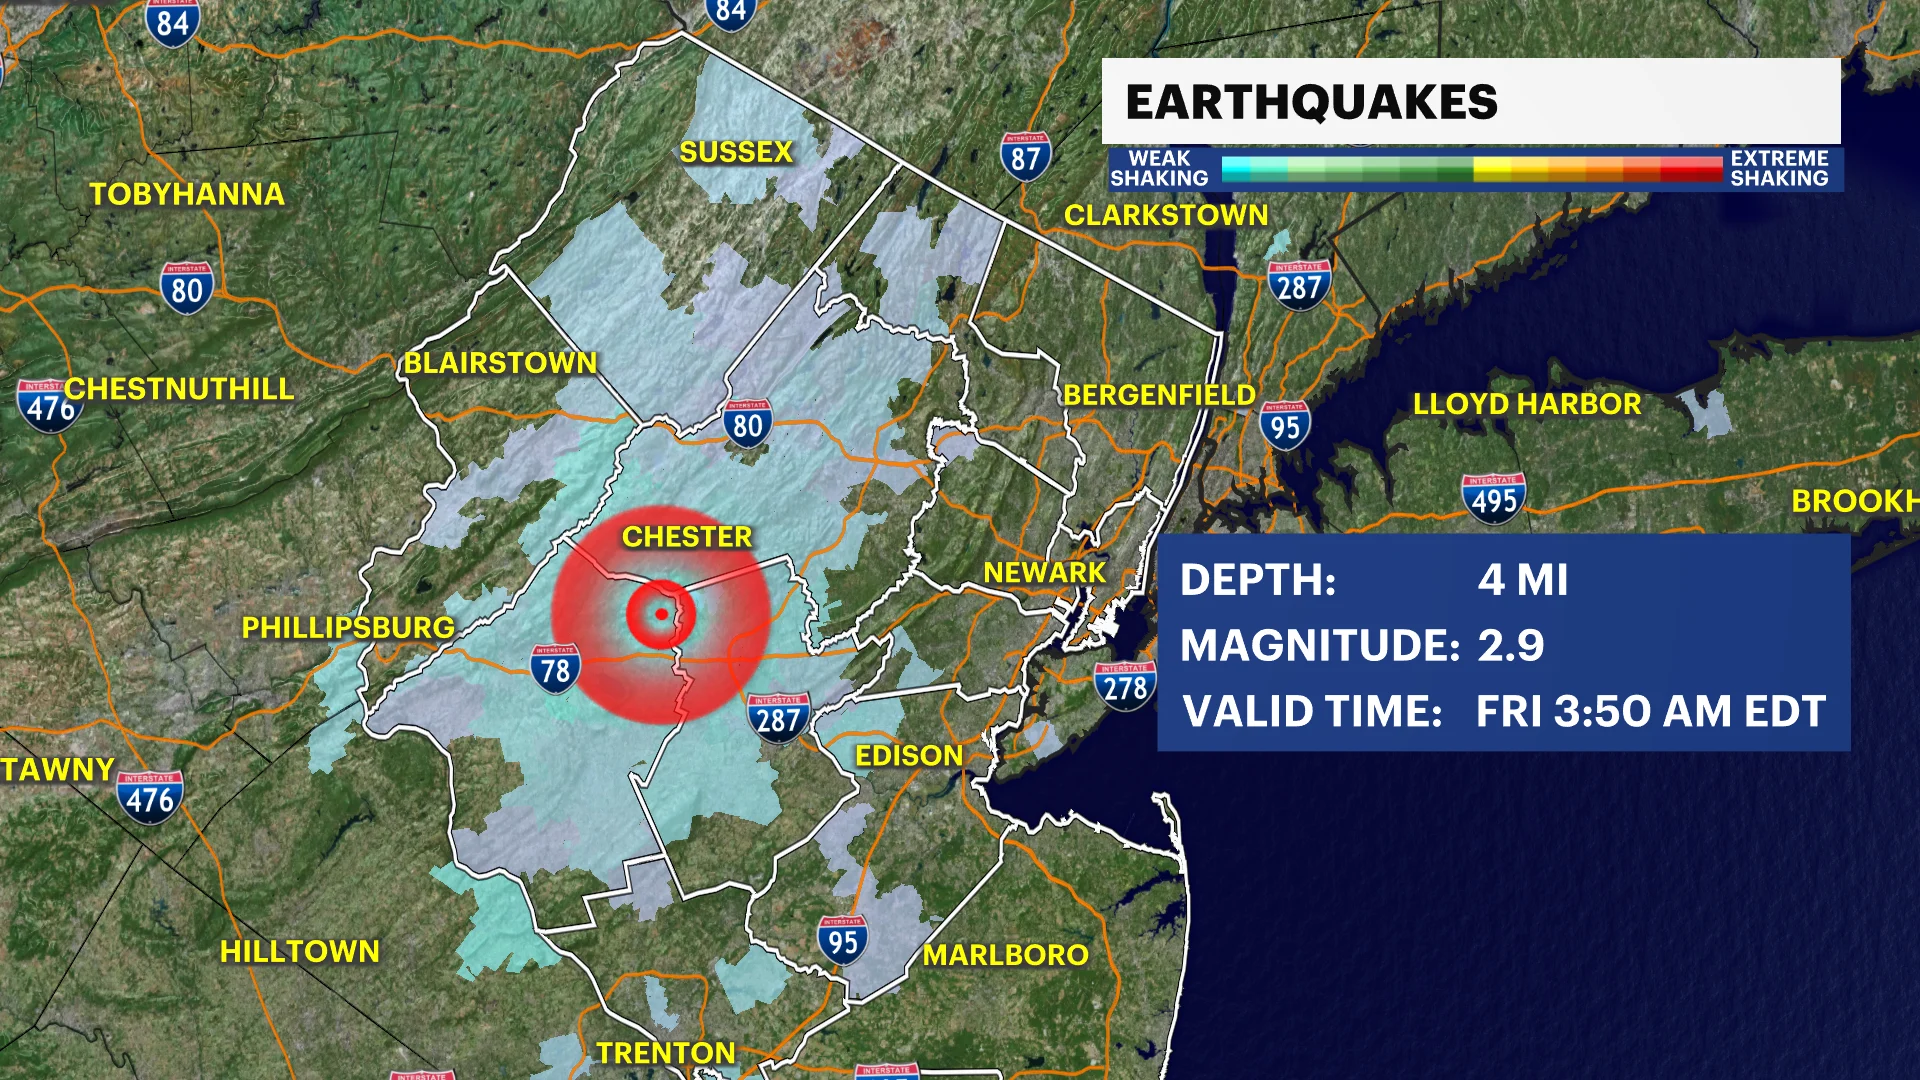 USGS says a 2.9 magnitude aftershock struck Tewksbury;  The 177th aftershock since the April earthquake